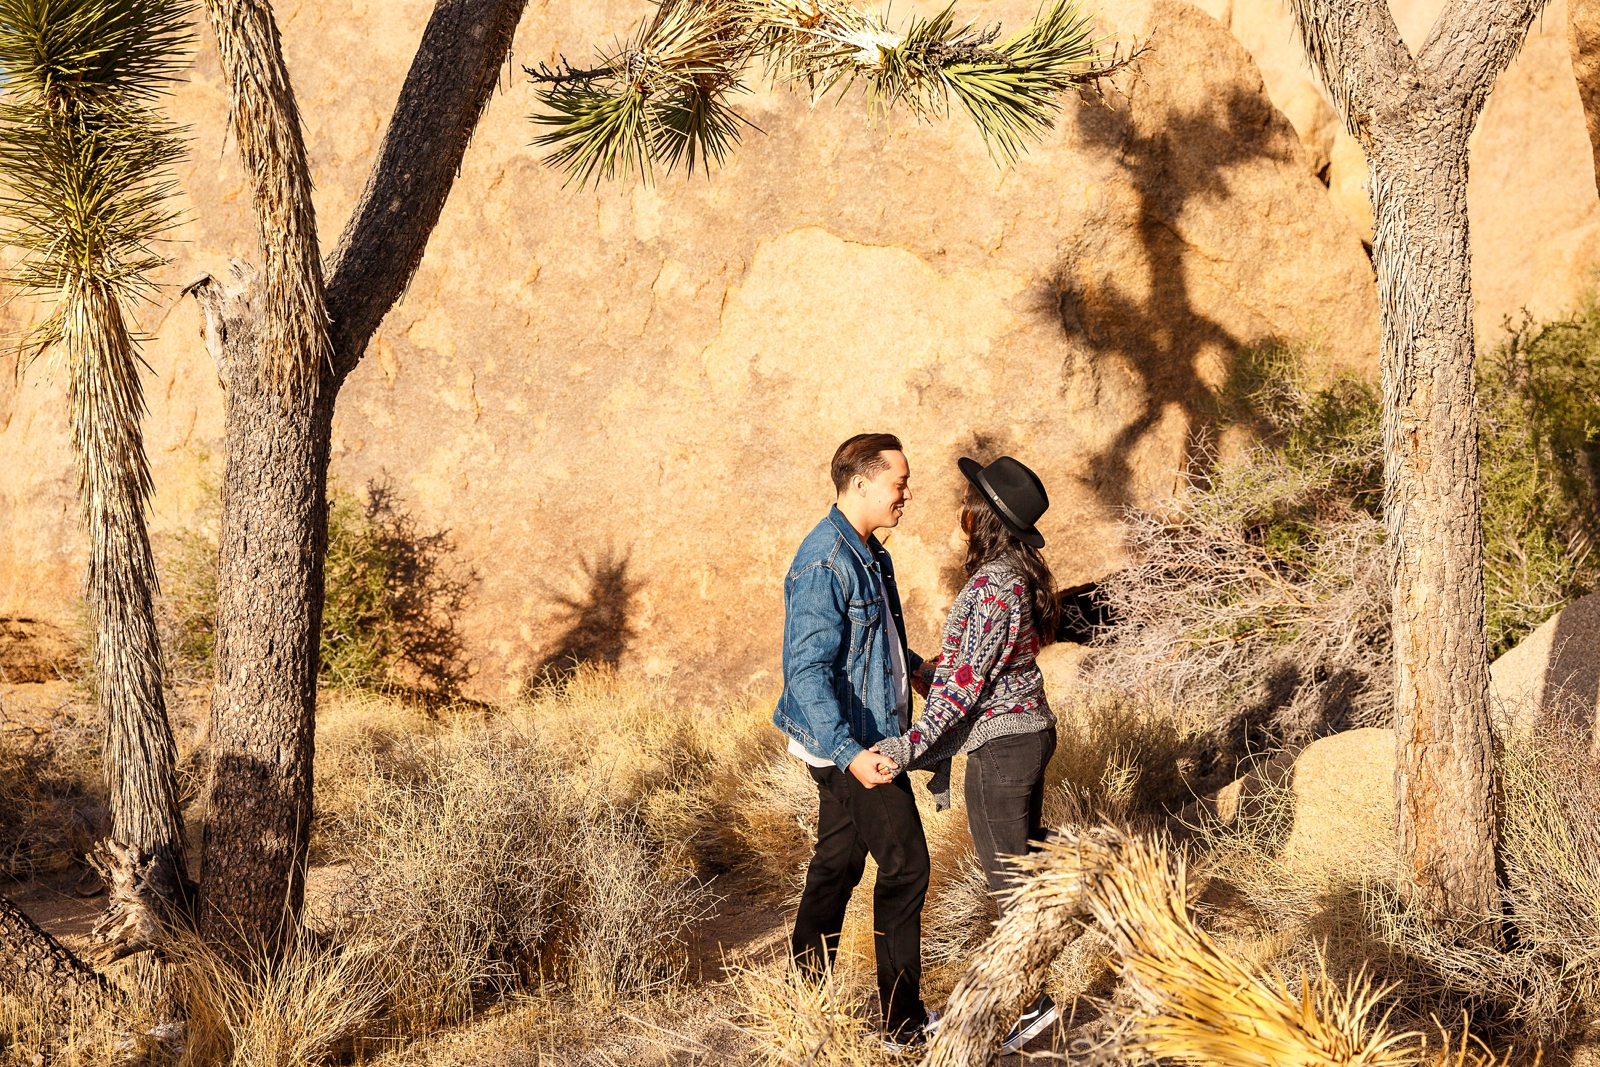 This engaged couple slow danced between Joshua Trees.